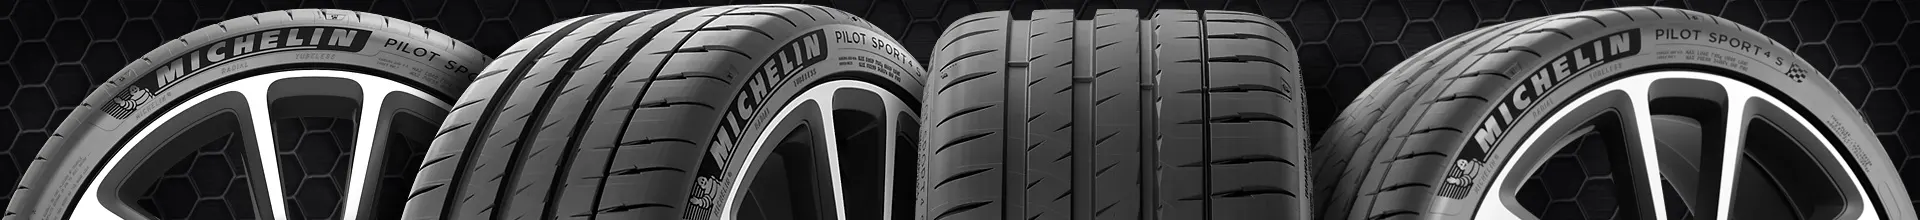 205 50 16 discount tires from Online Wheels Direct